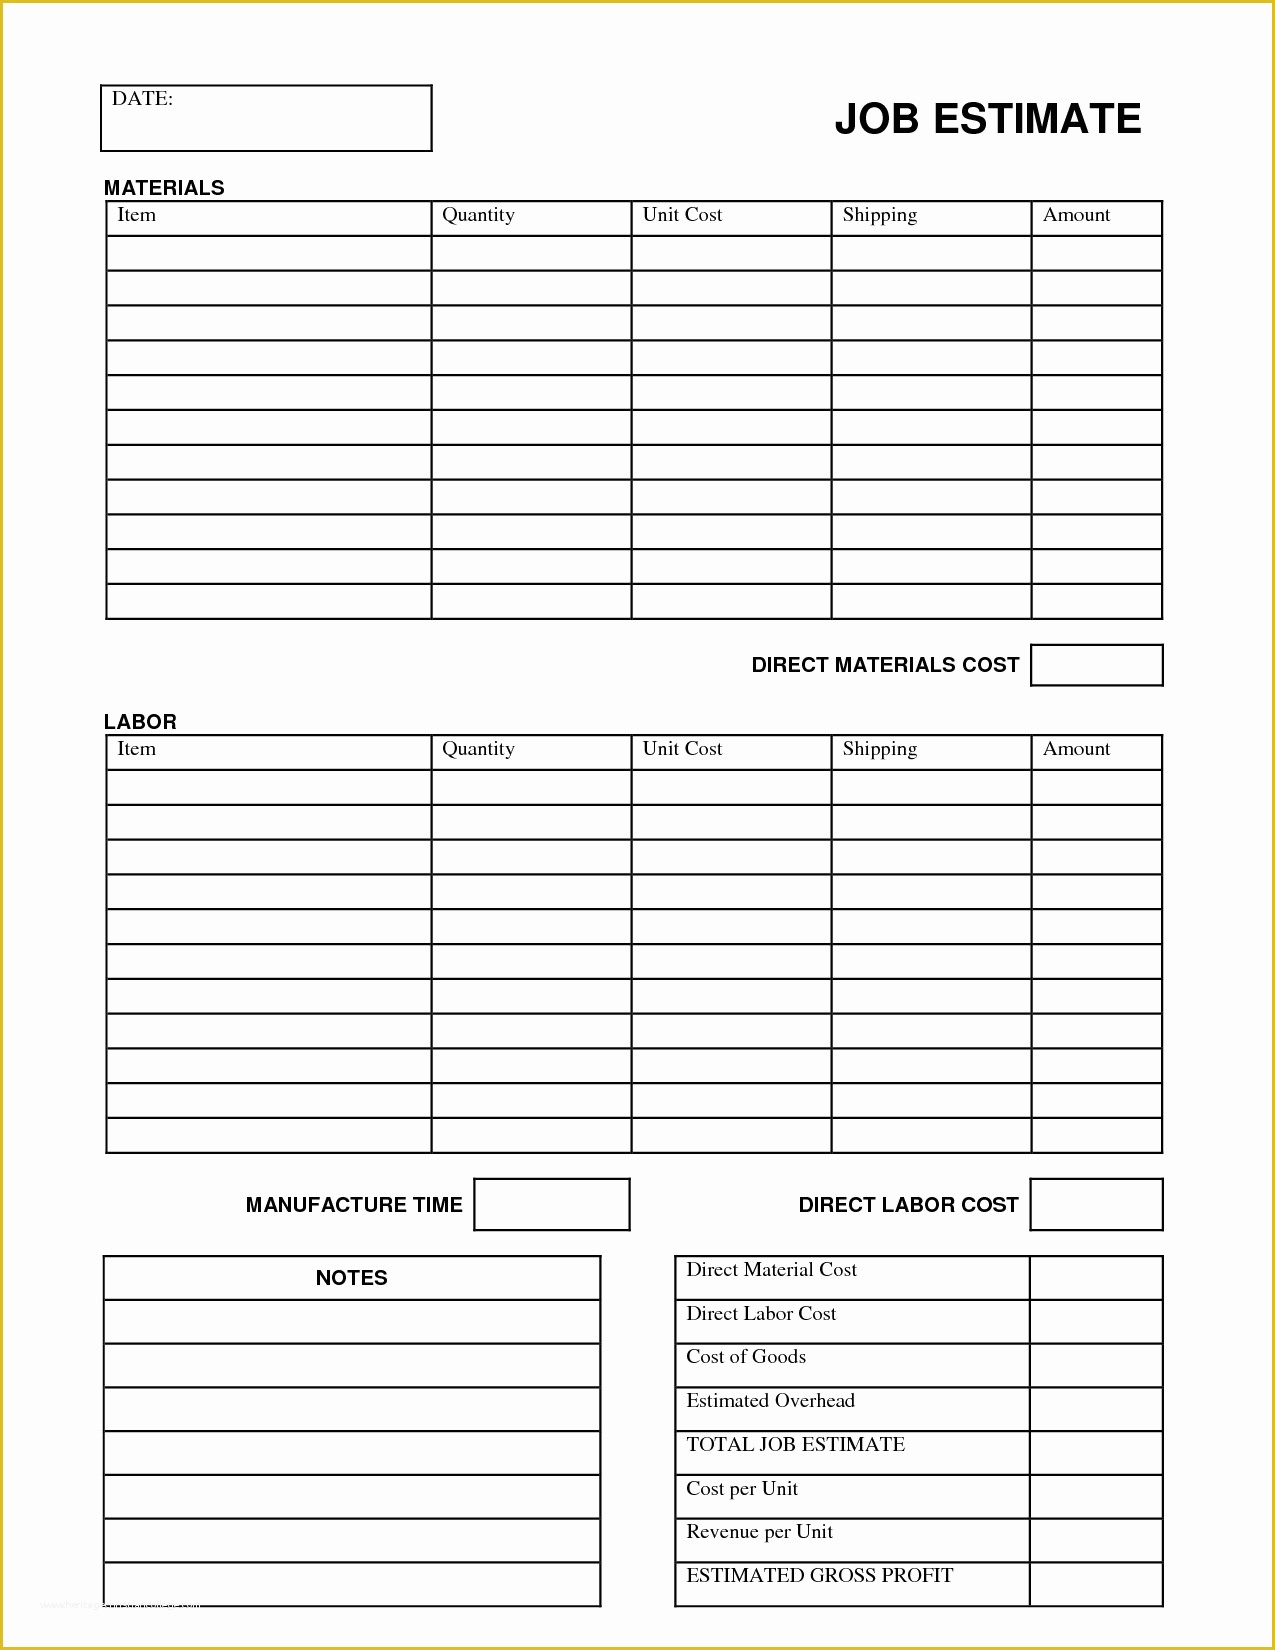 Free Project Estimate Template Of Printable Job Estimate forms